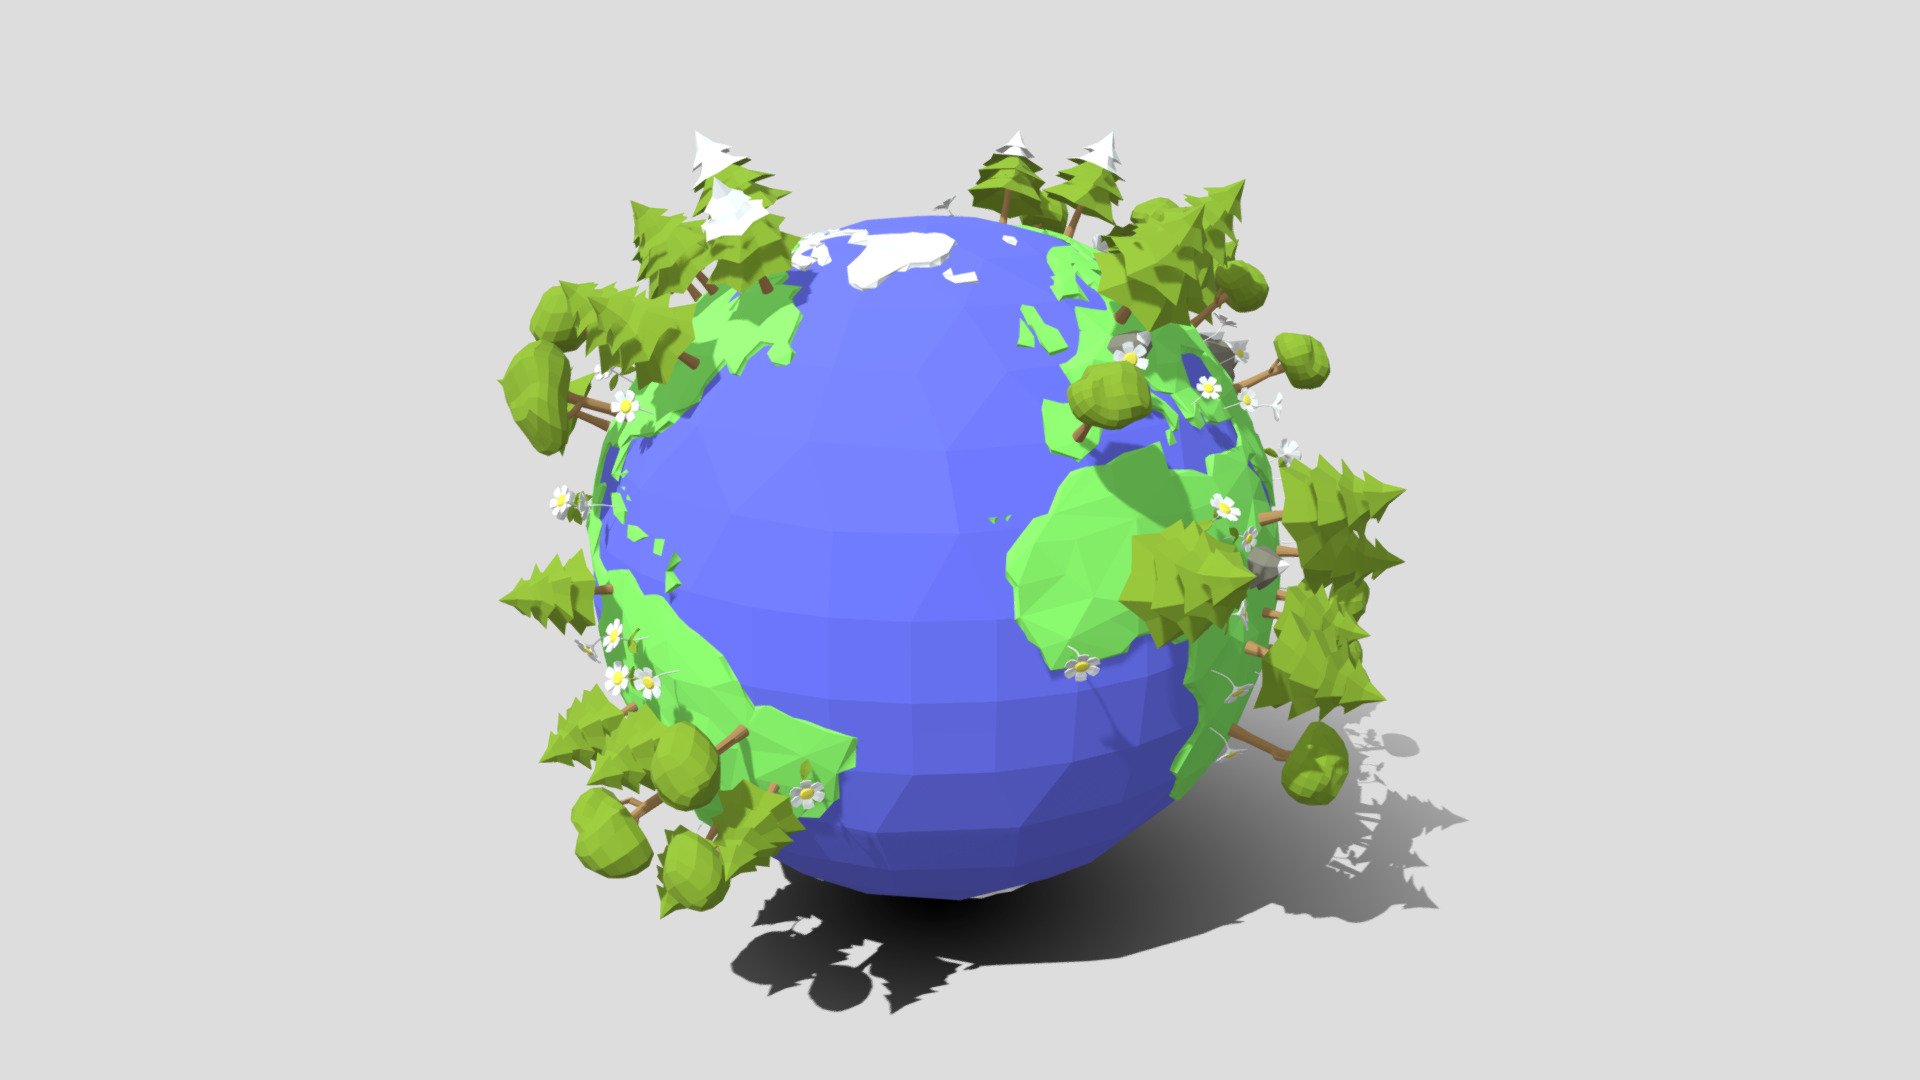 3D model of an origami style Earth 3d model